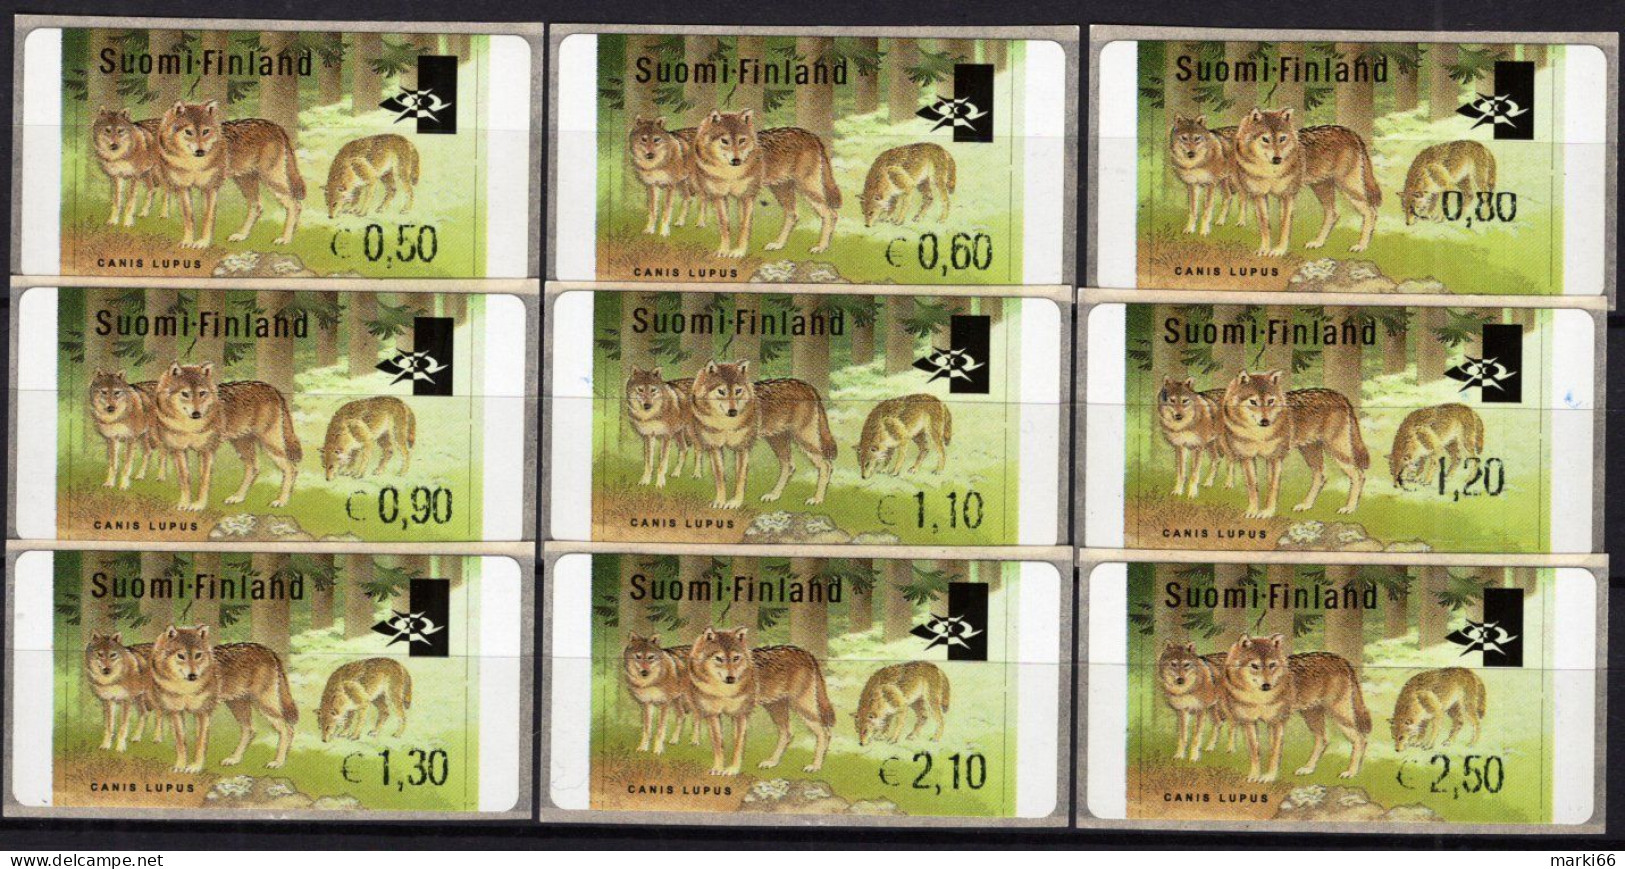 Finland - 2002 - Wolves - Canis Lupus - Mint ATM Self-adhesive Stamp Set (EUR) - Machine Labels [ATM]